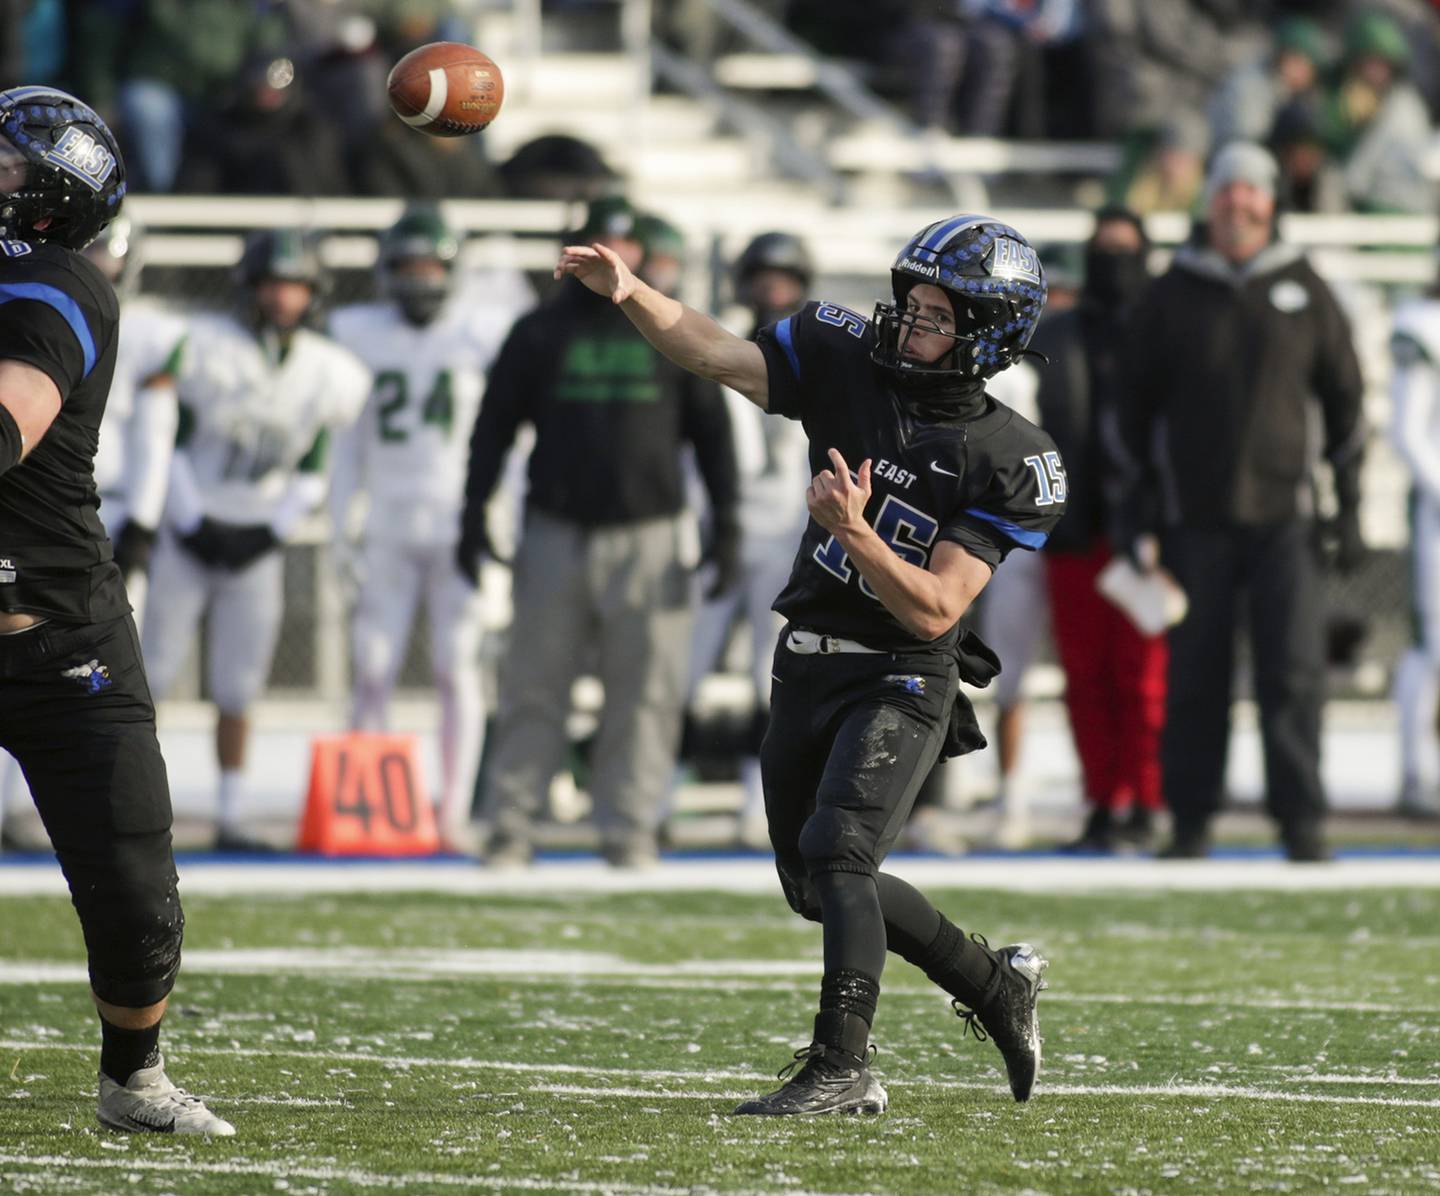 Lincoln-Way East’s Braden Tischer passes for a touchdown against Glenbard West during a Class 8A state semifinal game in Frankfort on Saturday, Nov. 19, 2022.